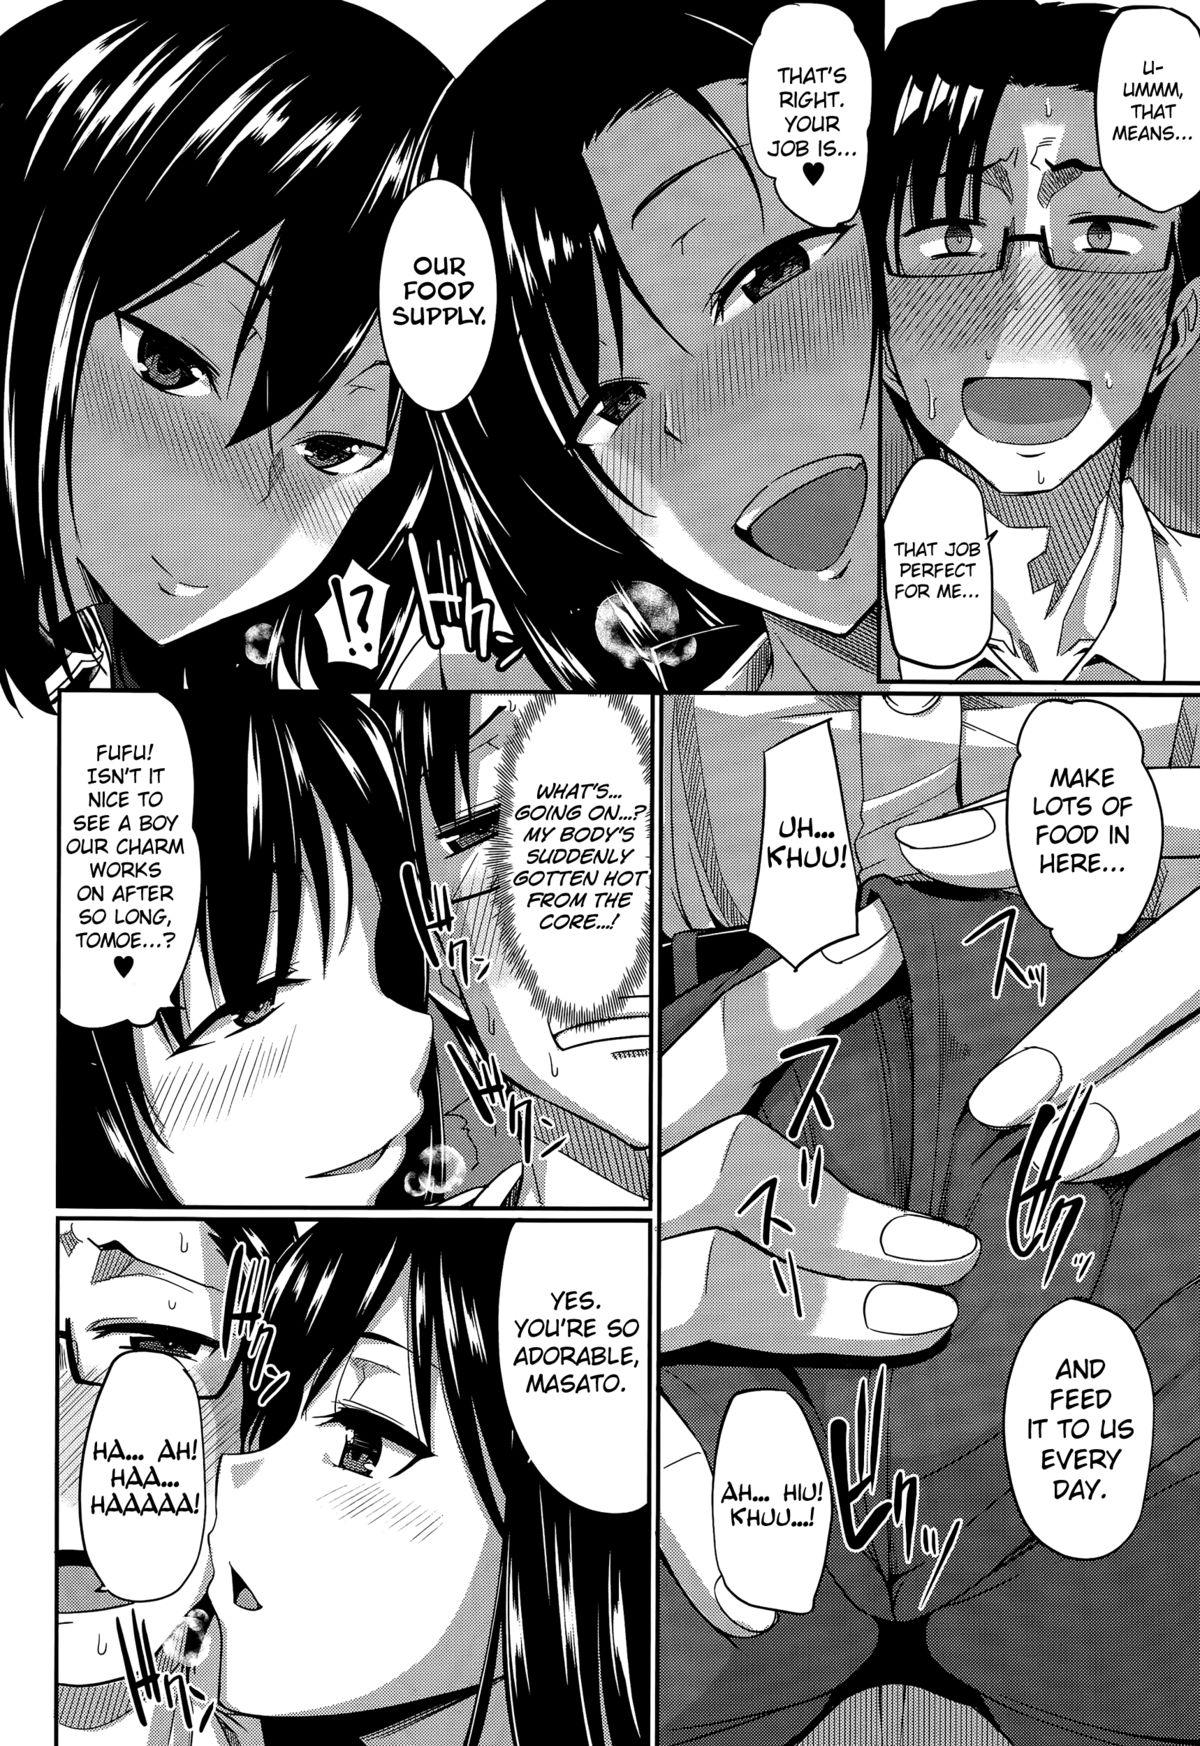 Topless Inma no Mikata! | Succubi's Supporter! Ch. 1-3 Freaky - Page 8